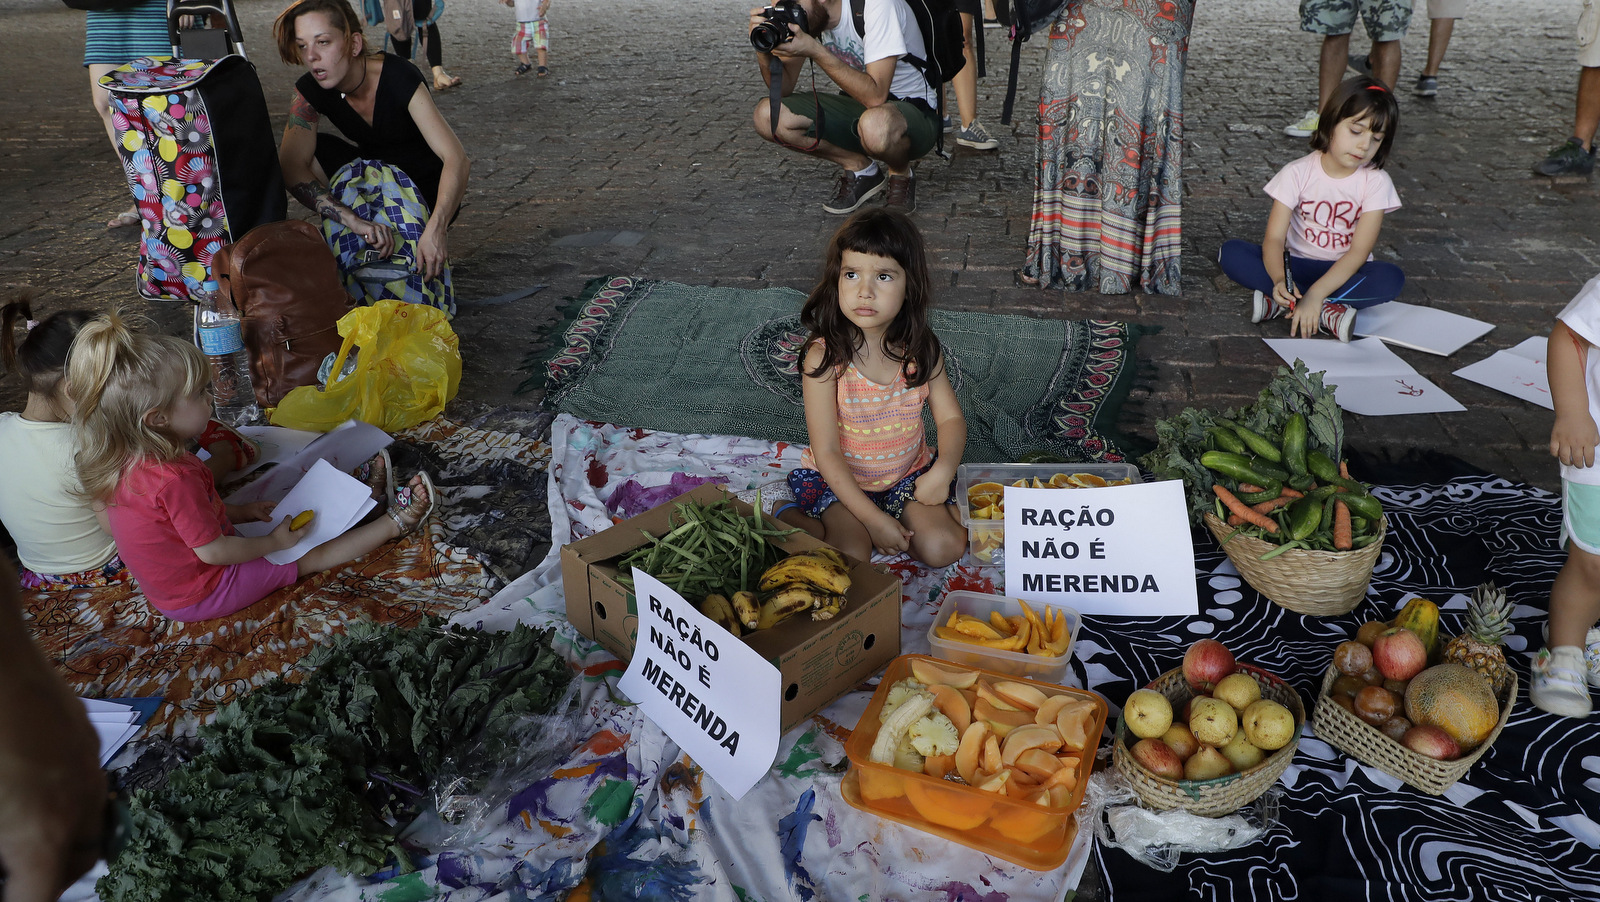 Mothers with their children protest Sao Paulo Mayor Joao Doria's plans to serve school meals made of reprocessed food pellets, next to vegetables and a sign that reads in Portuguese "Pellets are not meals" in Sao Paulo, Brazil, Thursday, Oct. 19, 2017. The pellets are made of dehydrated leftovers and resemble popcorn, and some are mixed into other foods, like cakes, while others can be eaten directly. (AP Photo/Andre Penner)